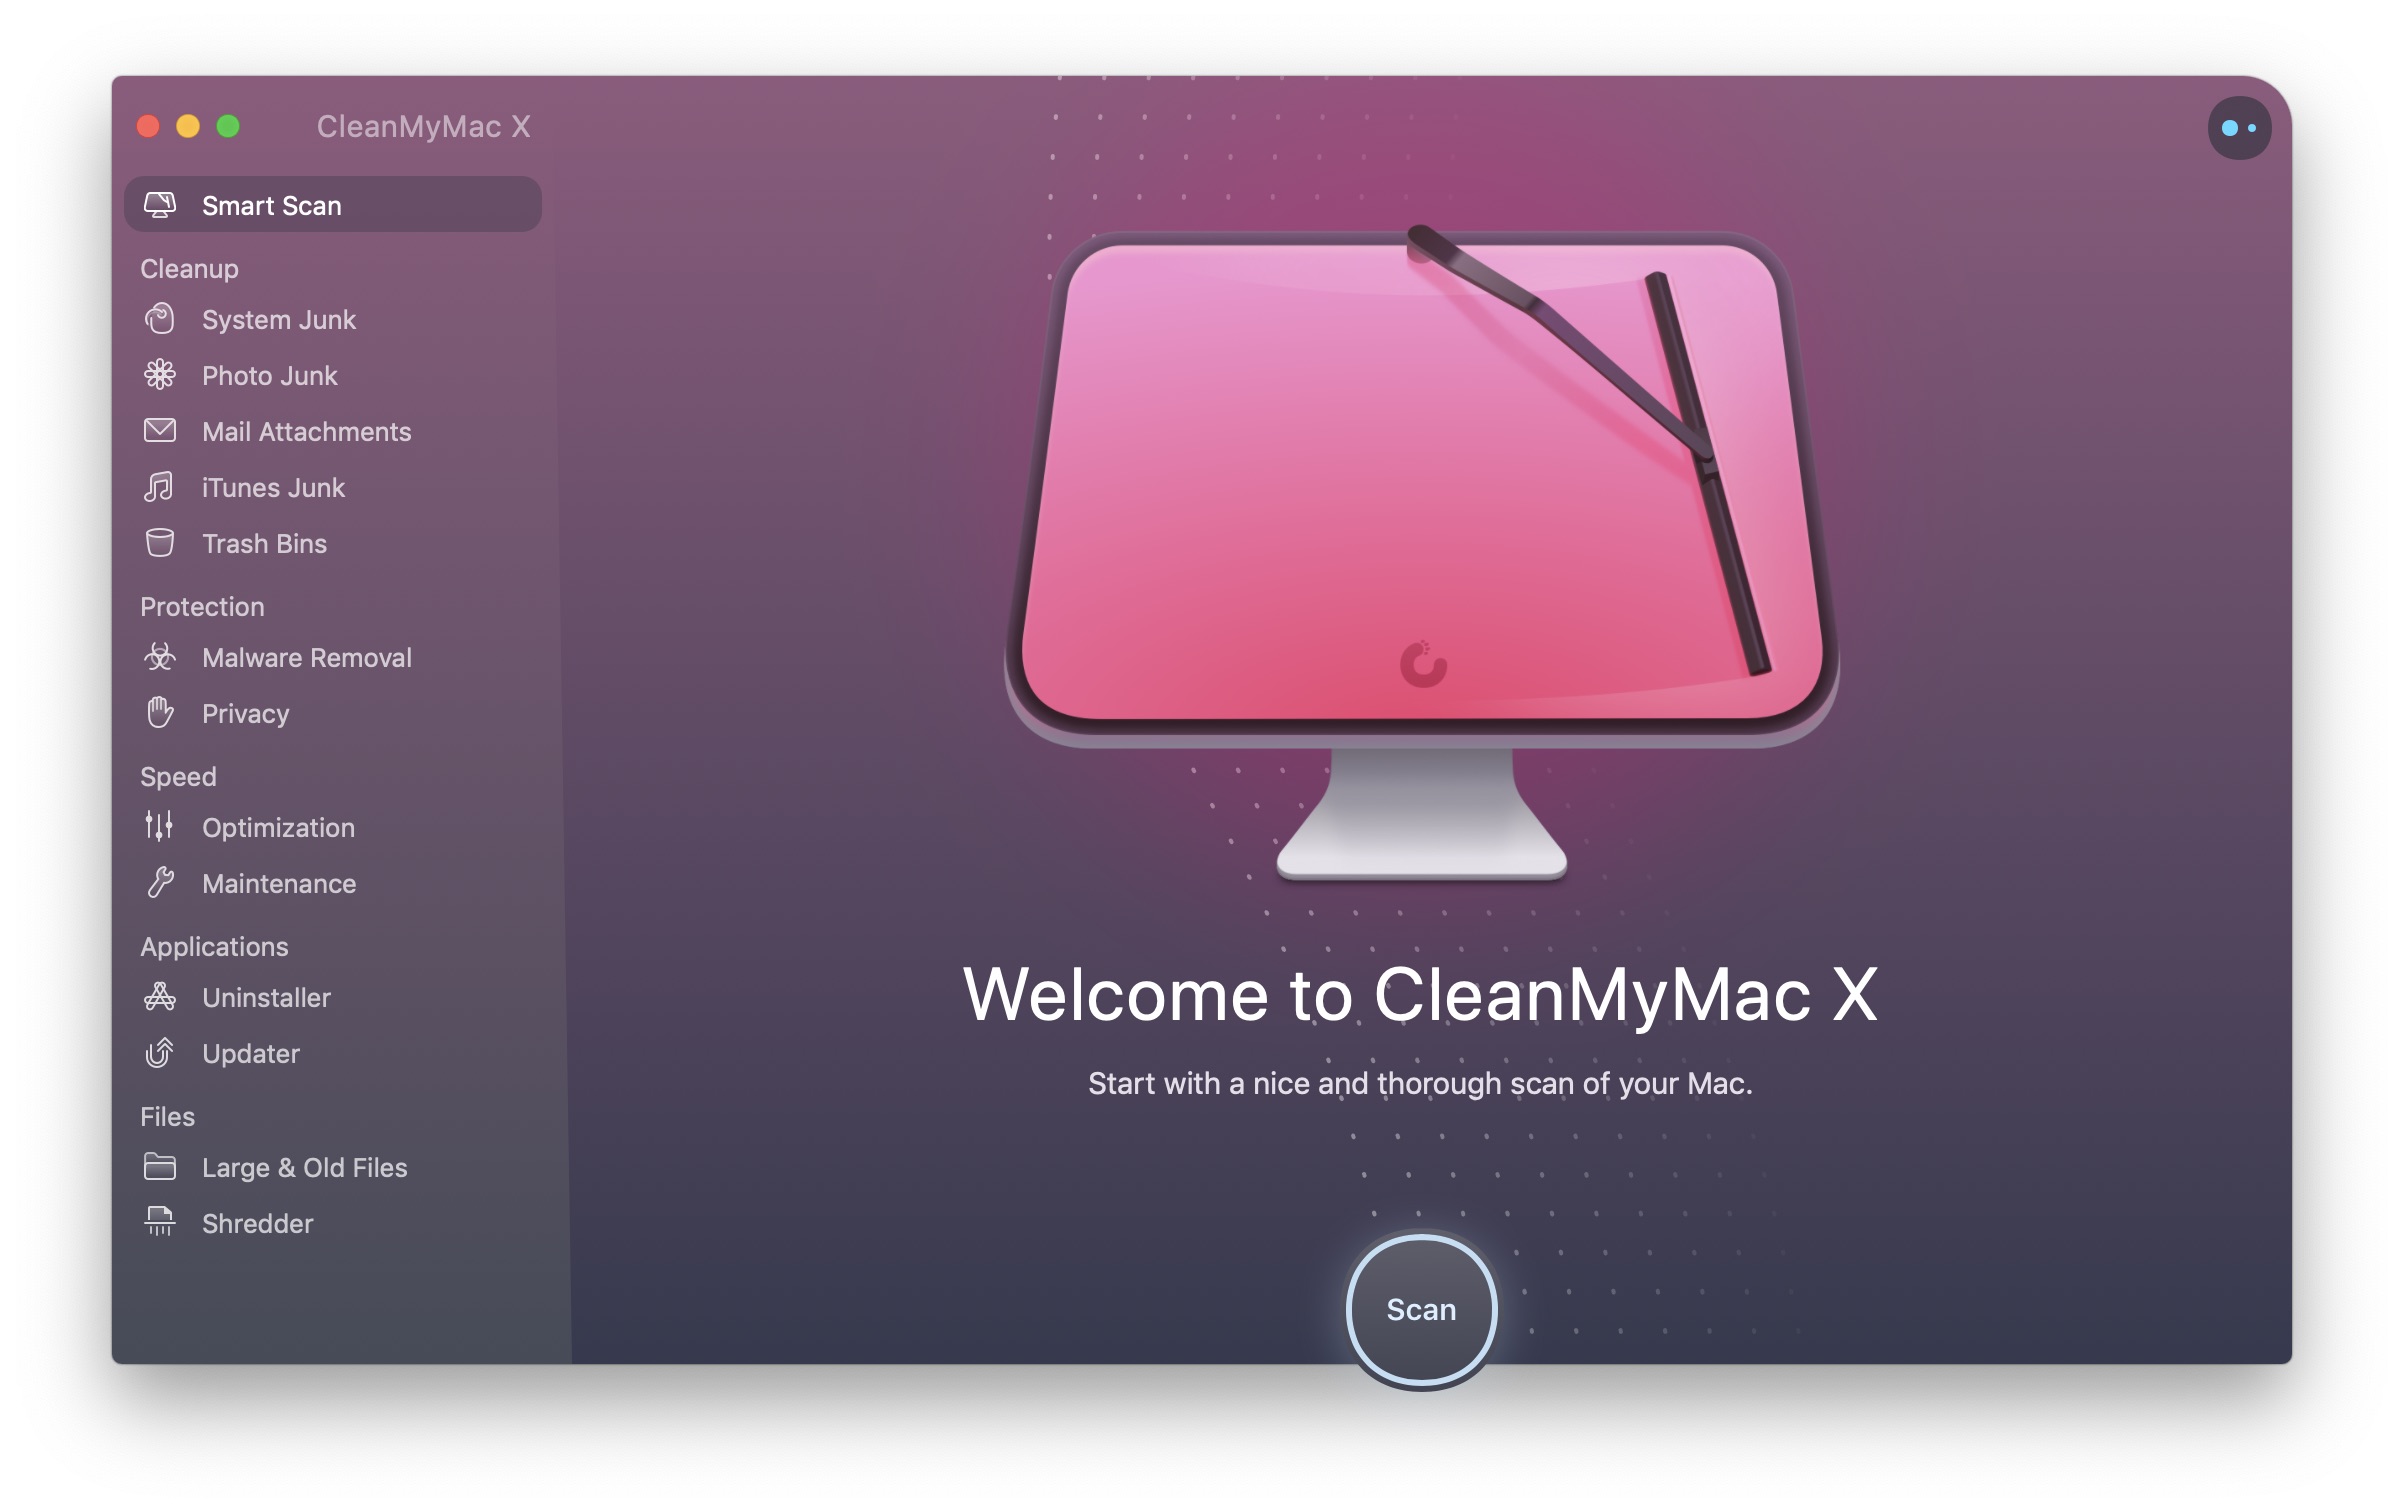 MacPaw launches a one-day 30% discount on CleanMyMac X, ClearVPN and more